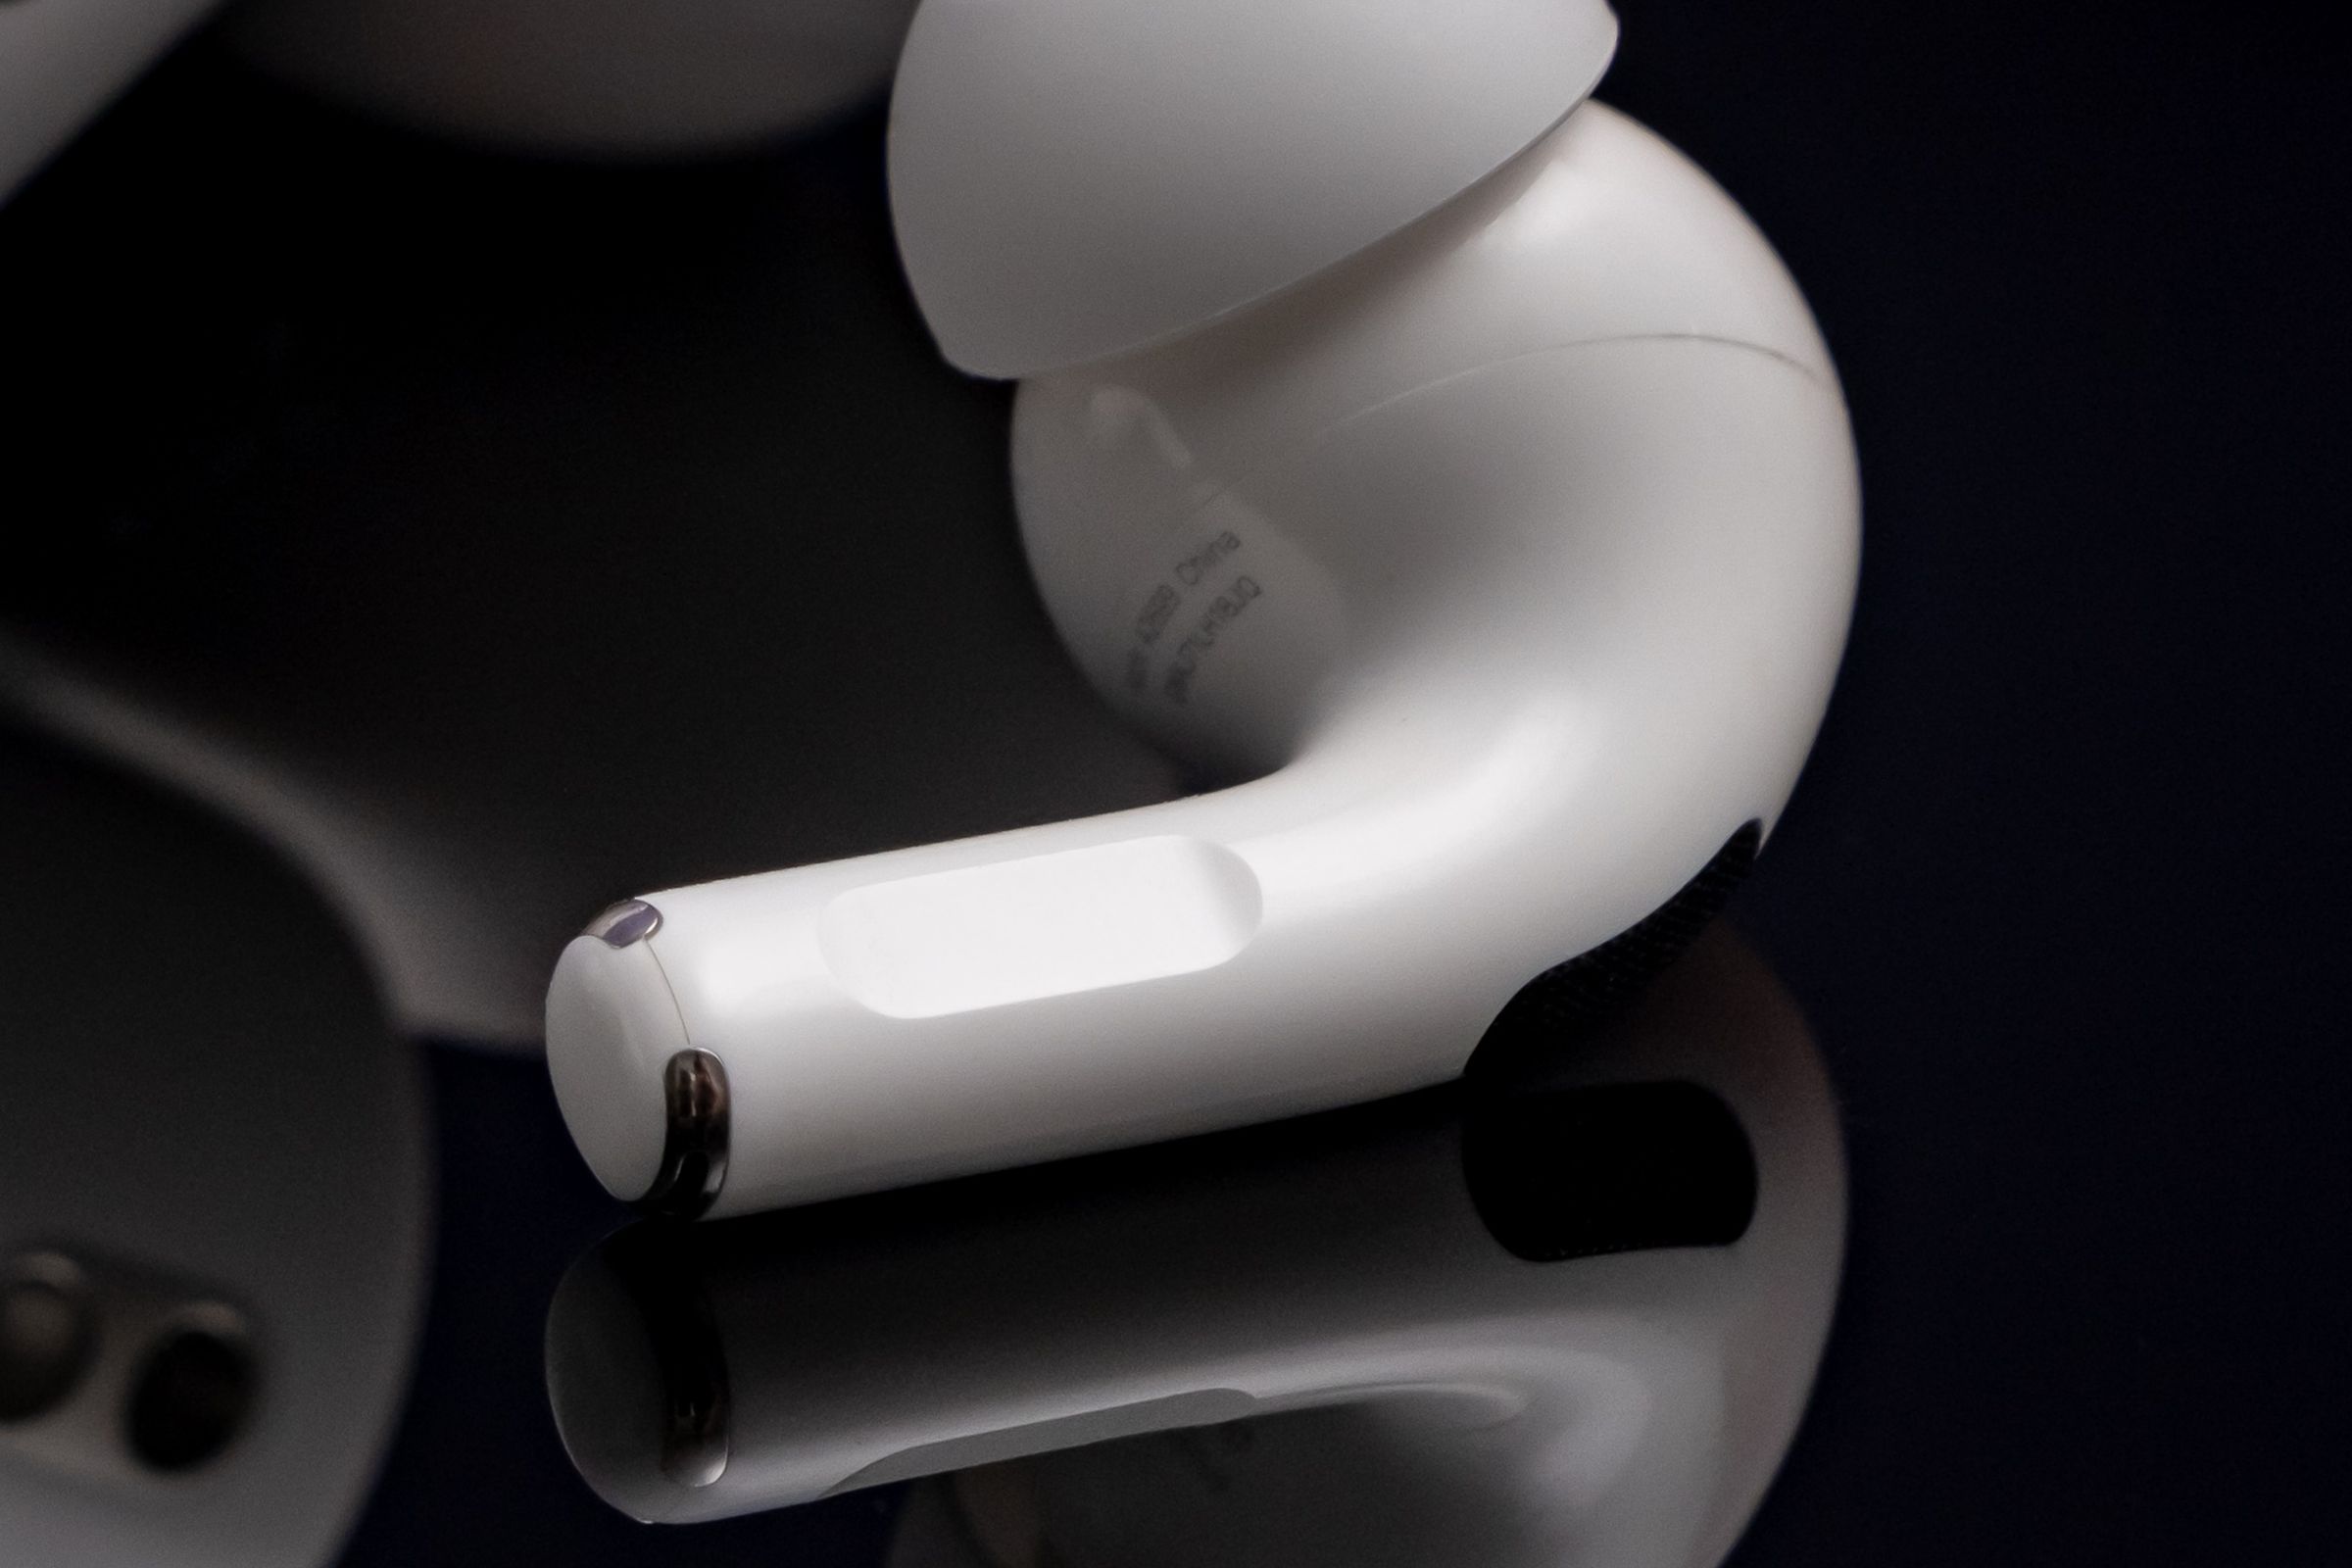 A close-up detail image of the touch sensor on Apple’s second-generation AirPods Pro.